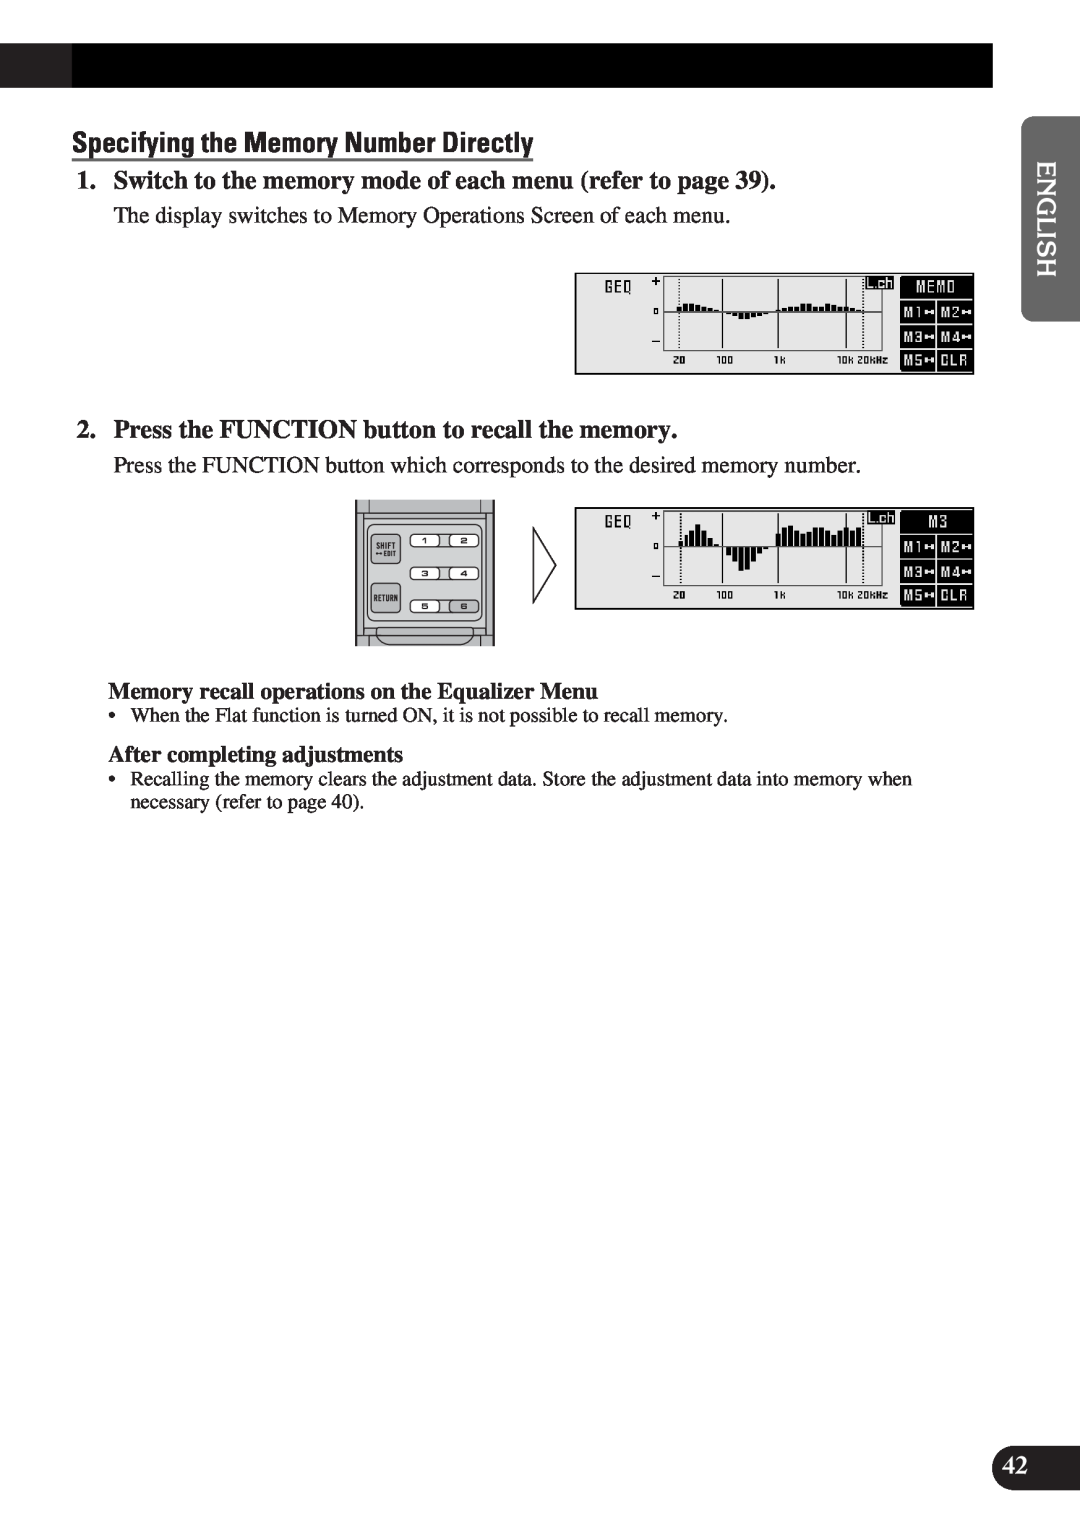 Pioneer DEQ-P9 owner manual Specifying the Memory Number Directly, Memory recall operations on the Equalizer Menu 